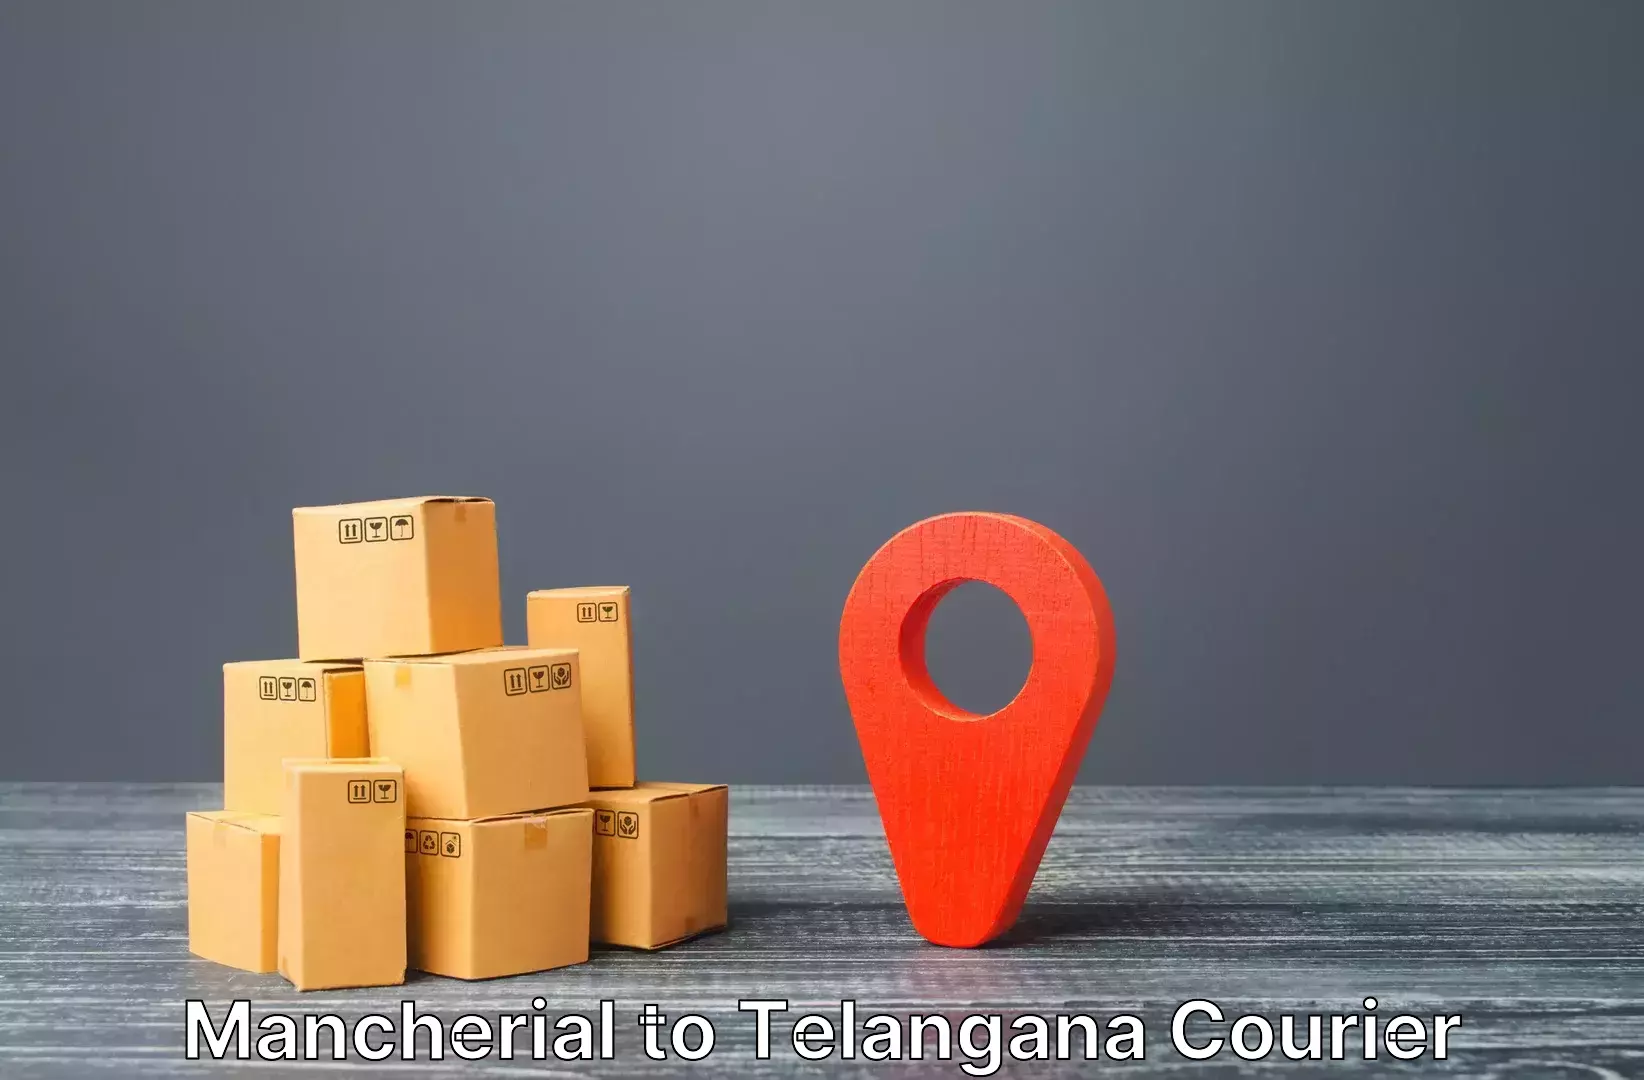 Luggage delivery estimate Mancherial to Madnoor